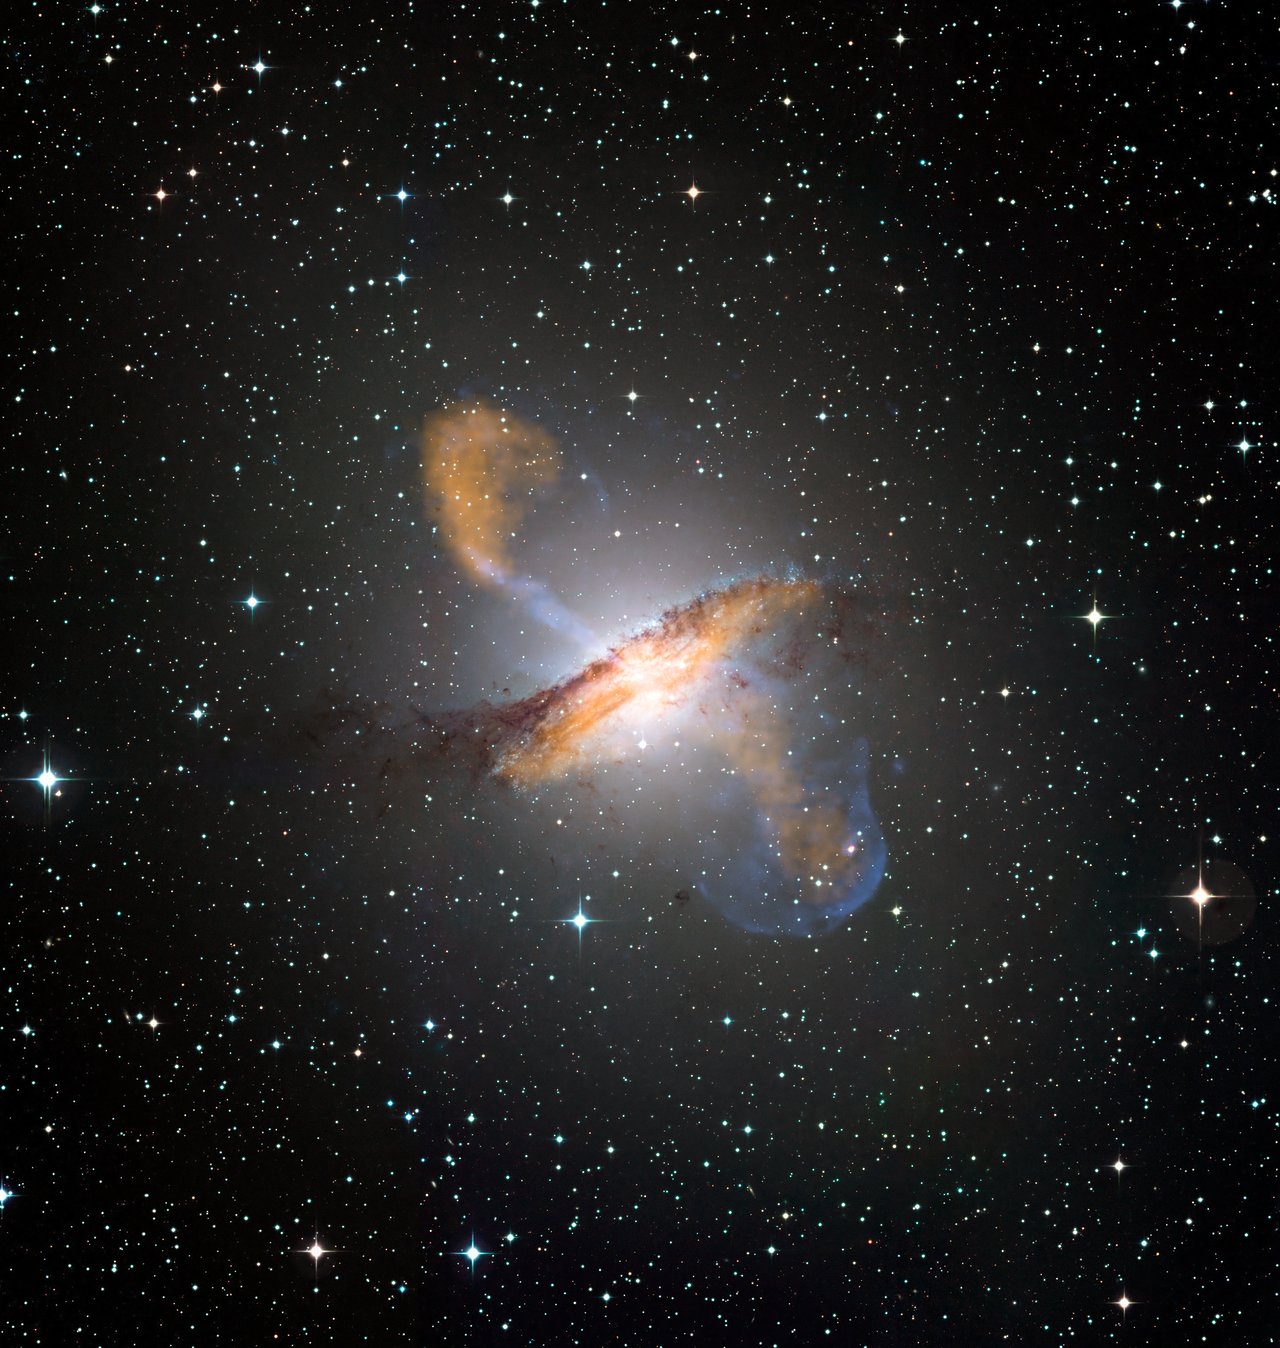 Colour composite image of Centaurus A, revealing the lobes and jets emanating from the active galaxy’s central black hole. This is a composite of images obtained with three instruments, operating at very different wavelengths. Credit: ESO/WFI (Optical); MPIfR/ESO/APEX/A.Weiss et al. (Submillimetre); NASA/CXC/CfA/R.Kraft et al. (X-ray)